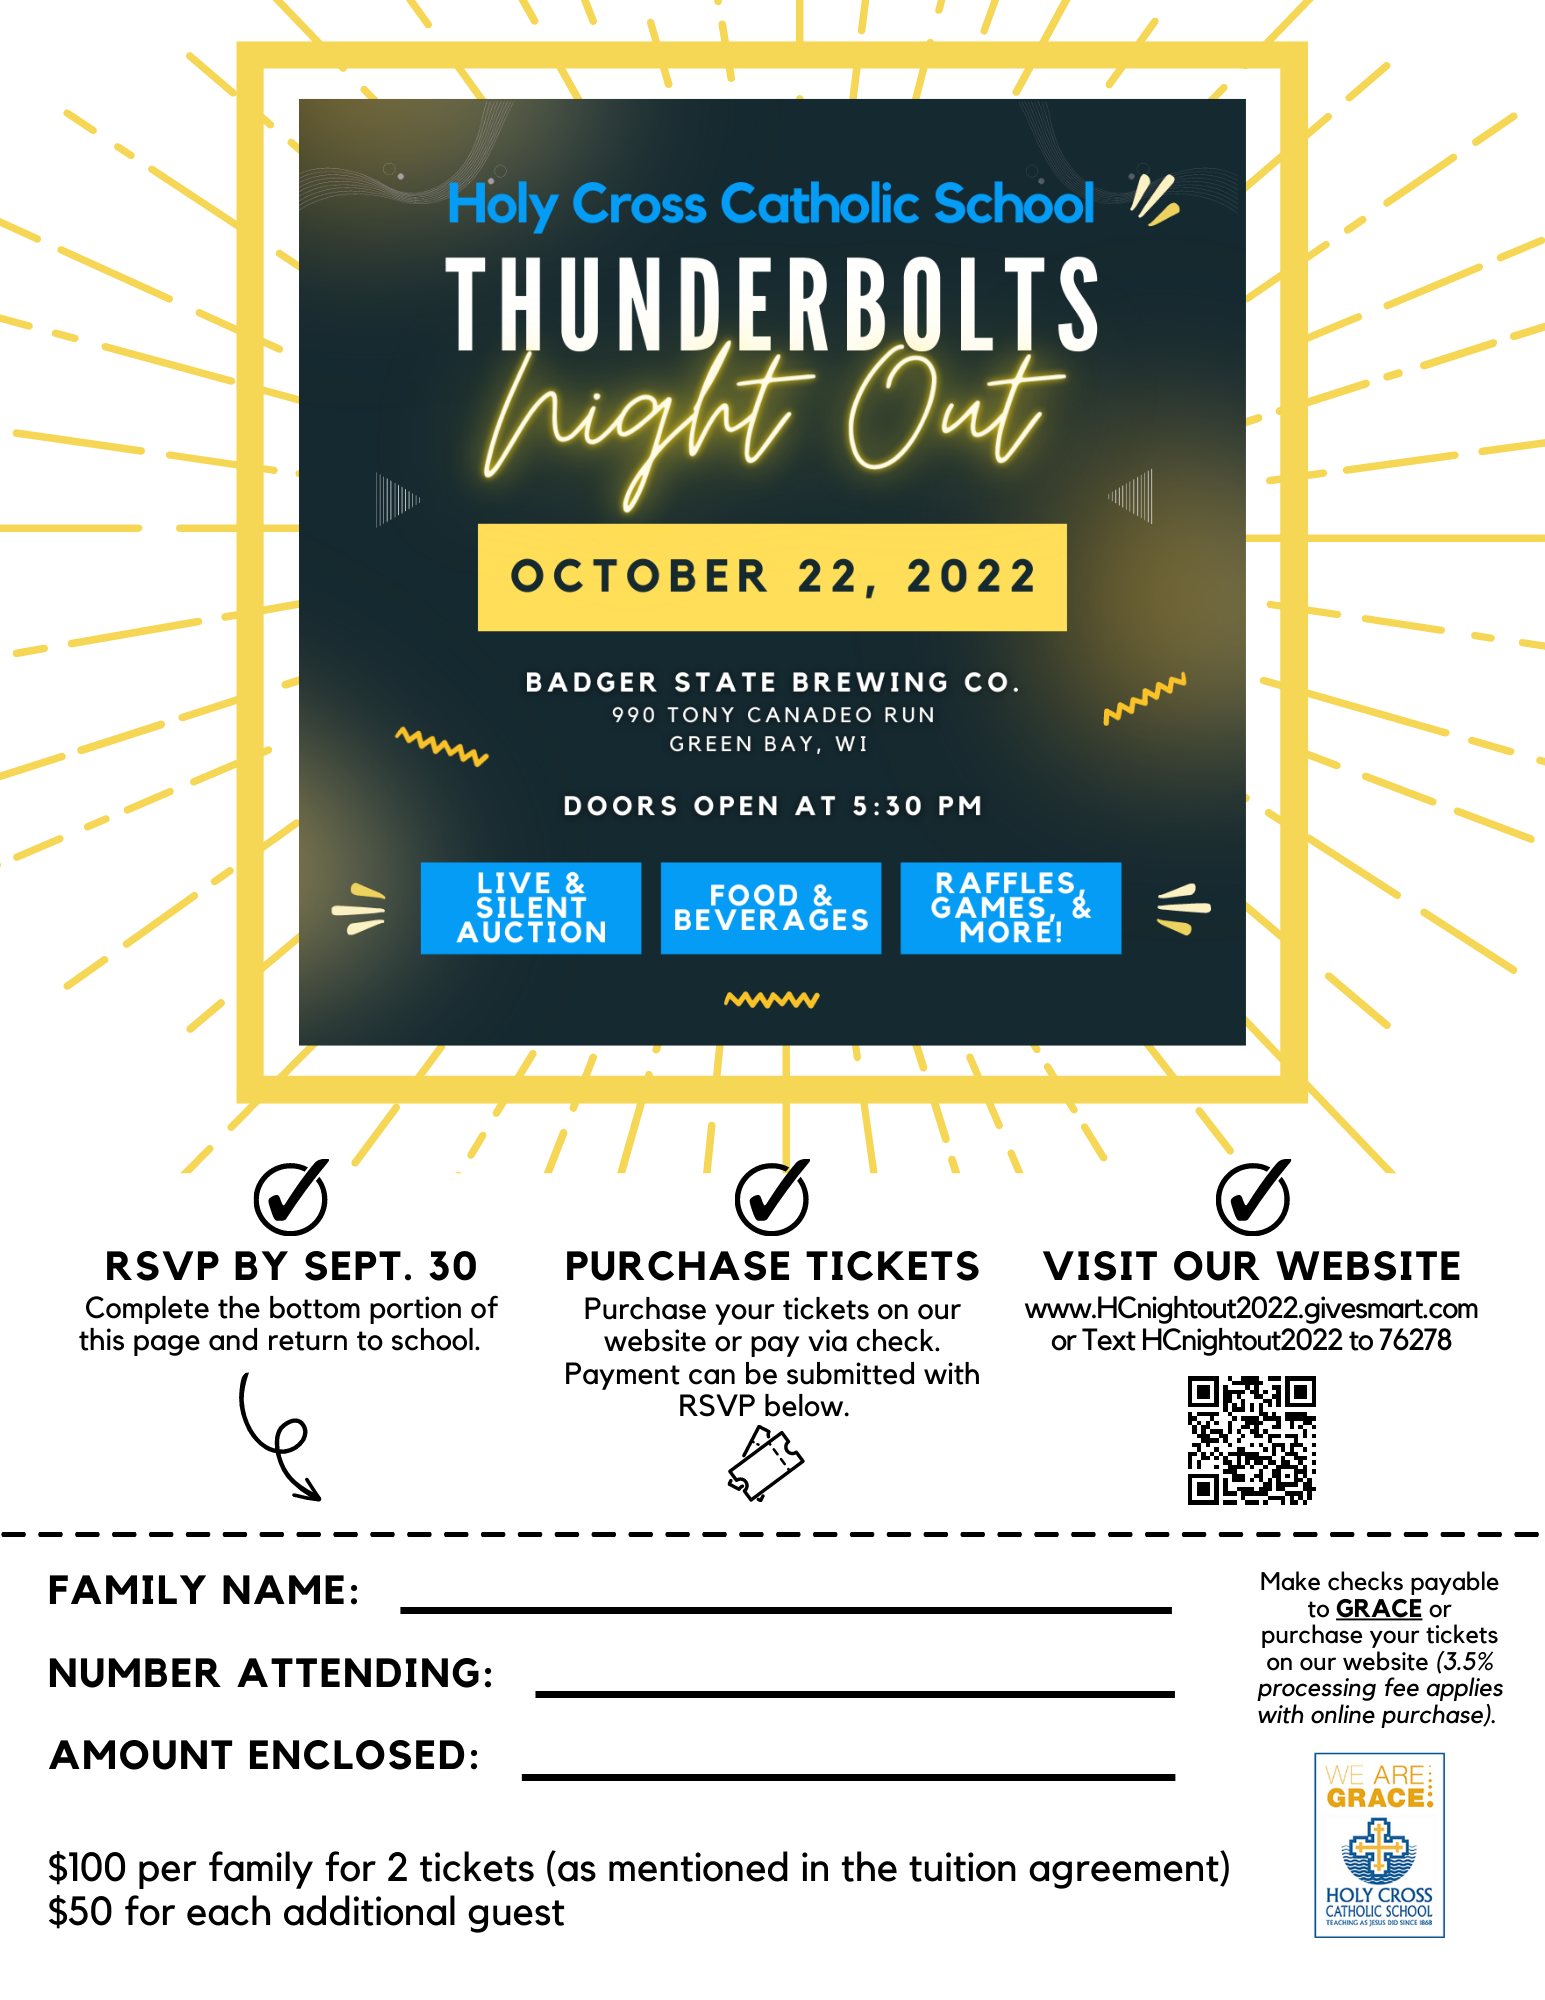 Graphic for Thunderbolts Night Out at Holy Cross School which is located near Wequiock Falls.